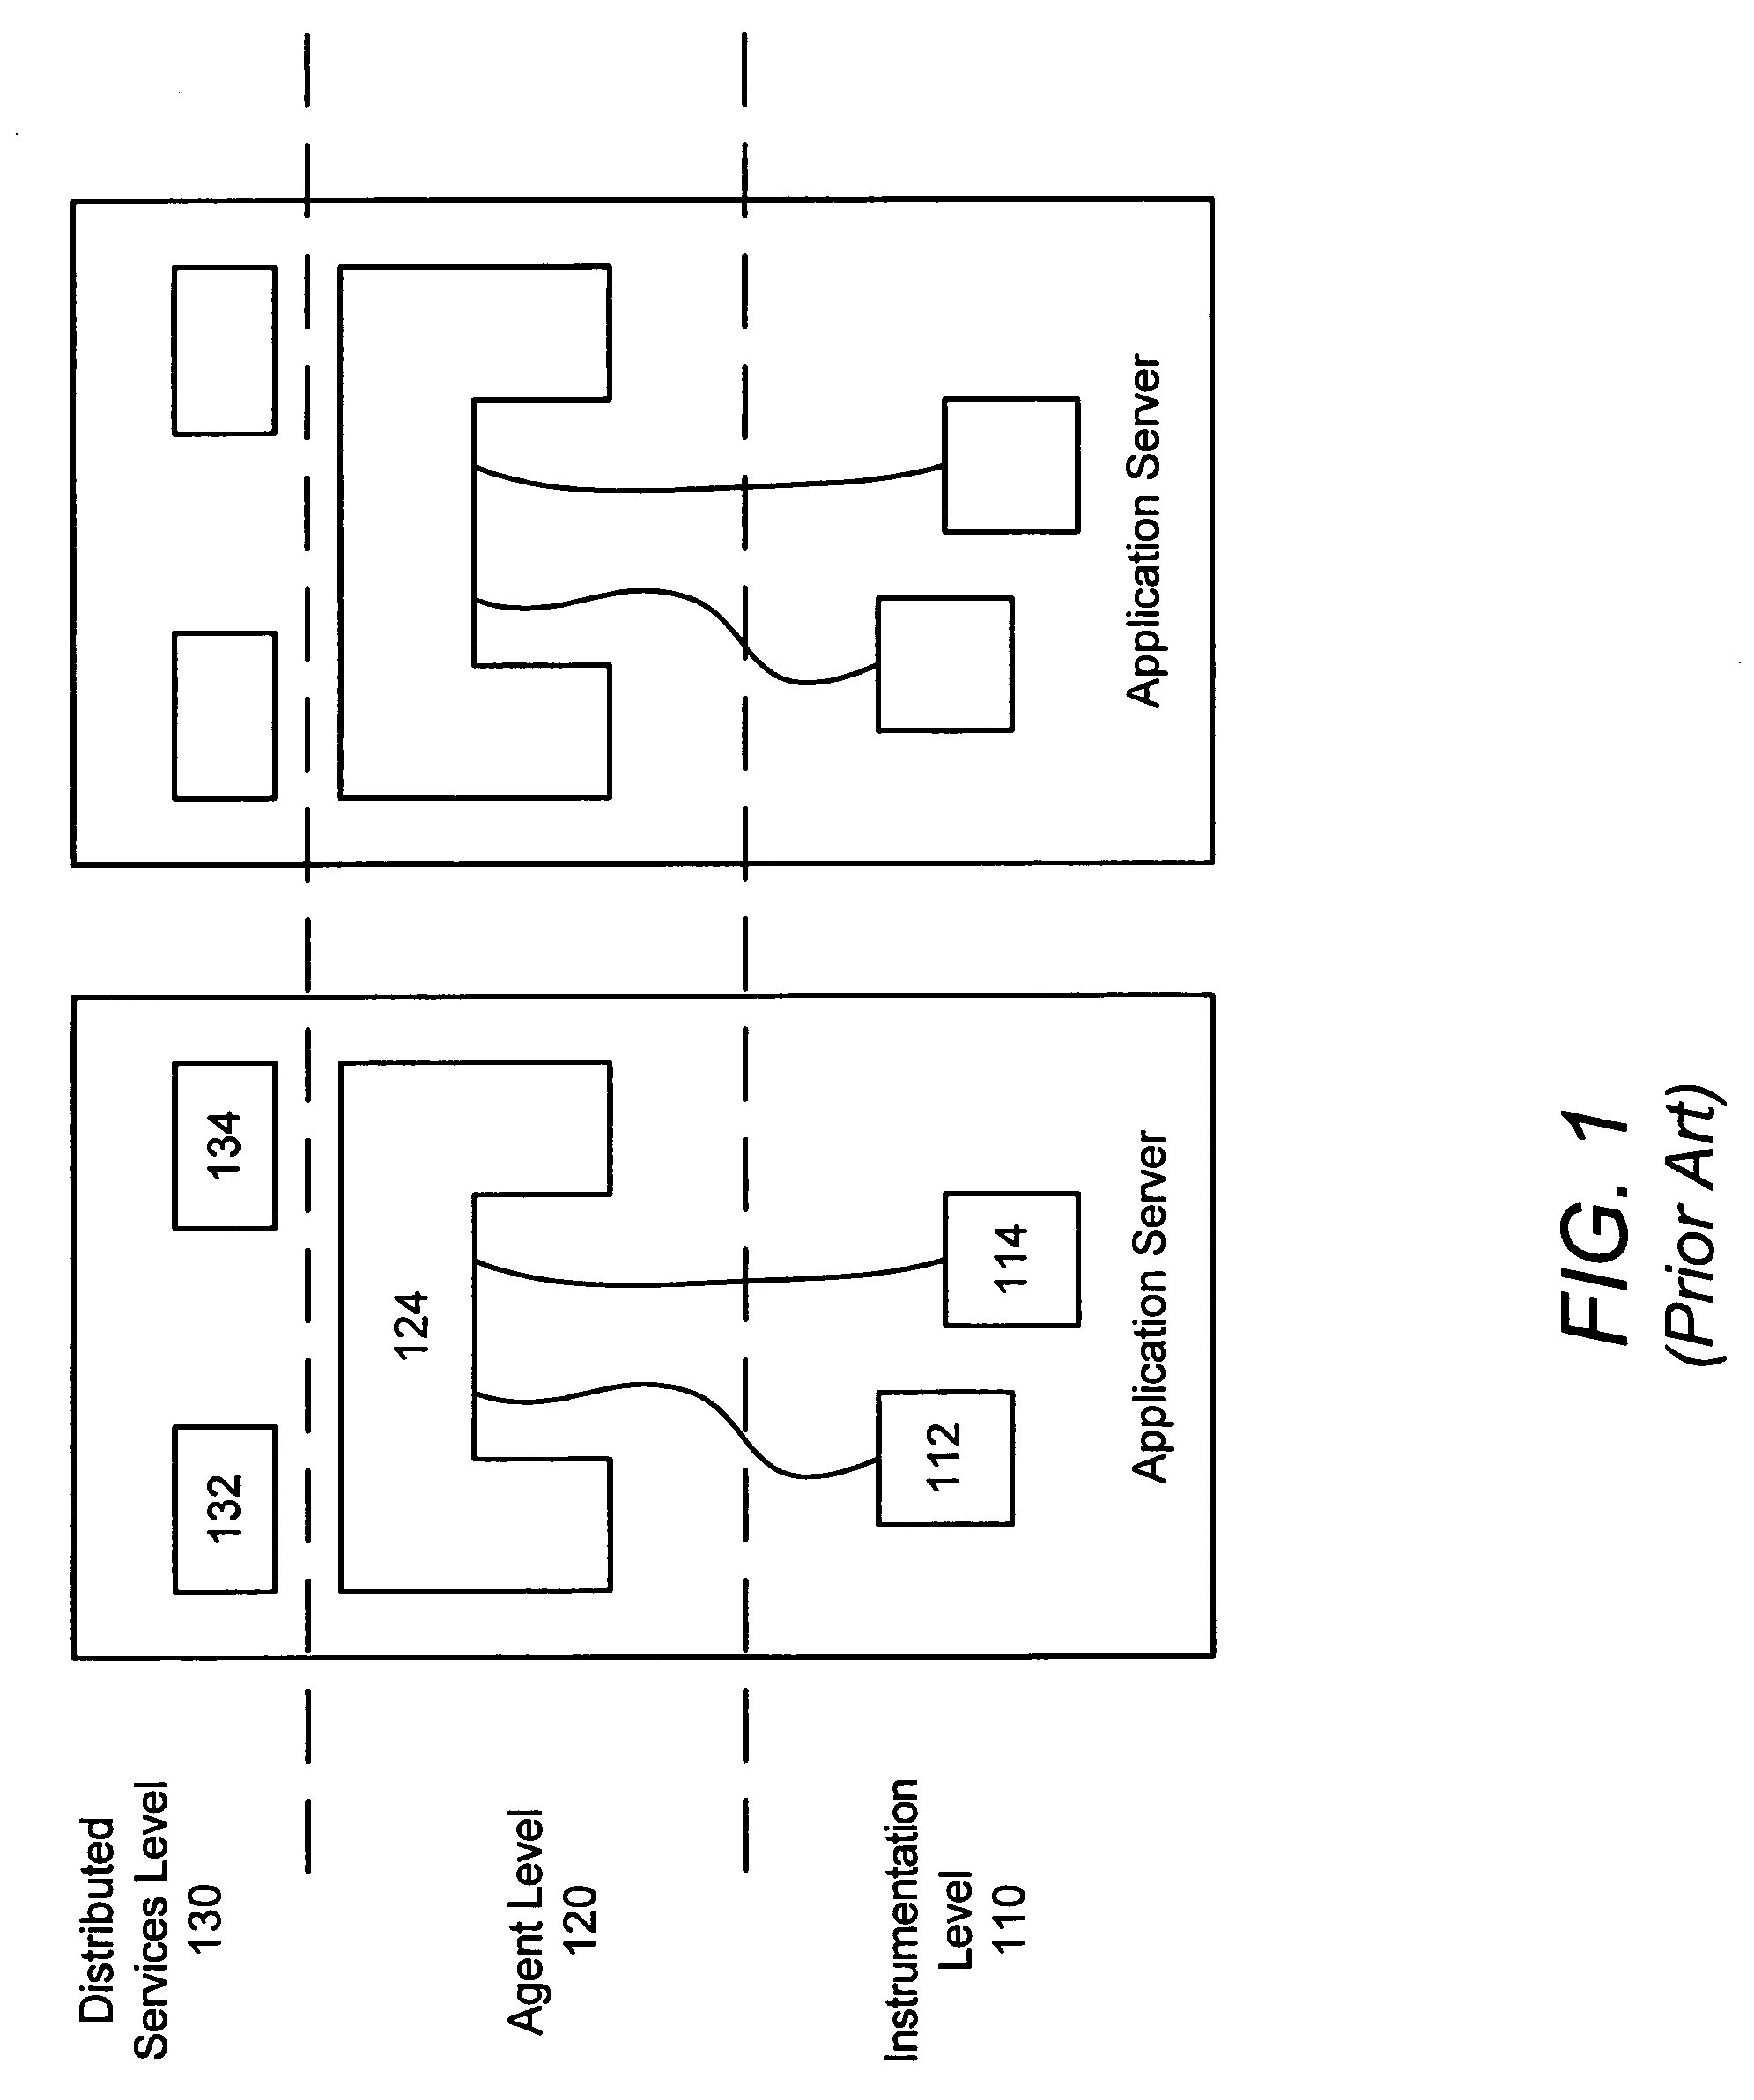 Monitor viewer for an enterprise network monitoring system